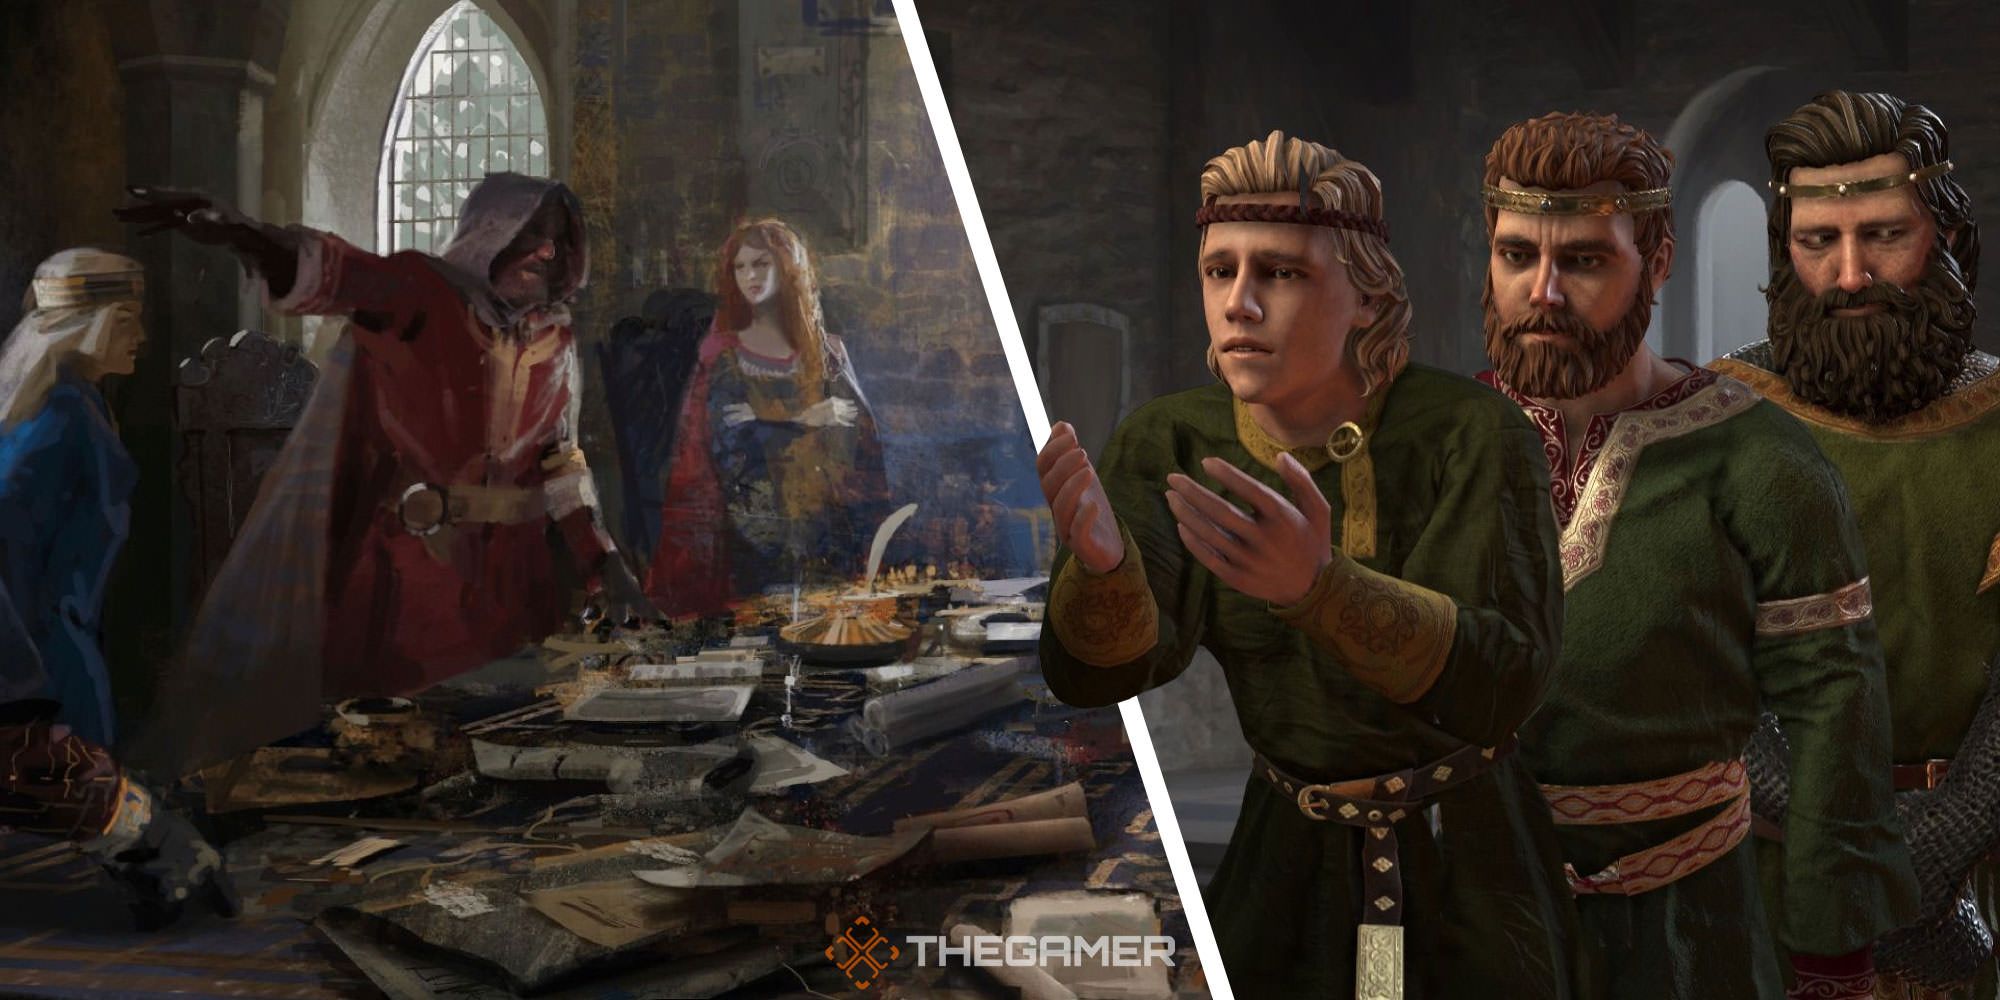 Here's How to Install Mods Manually for Crusader Kings 3 - Gayming